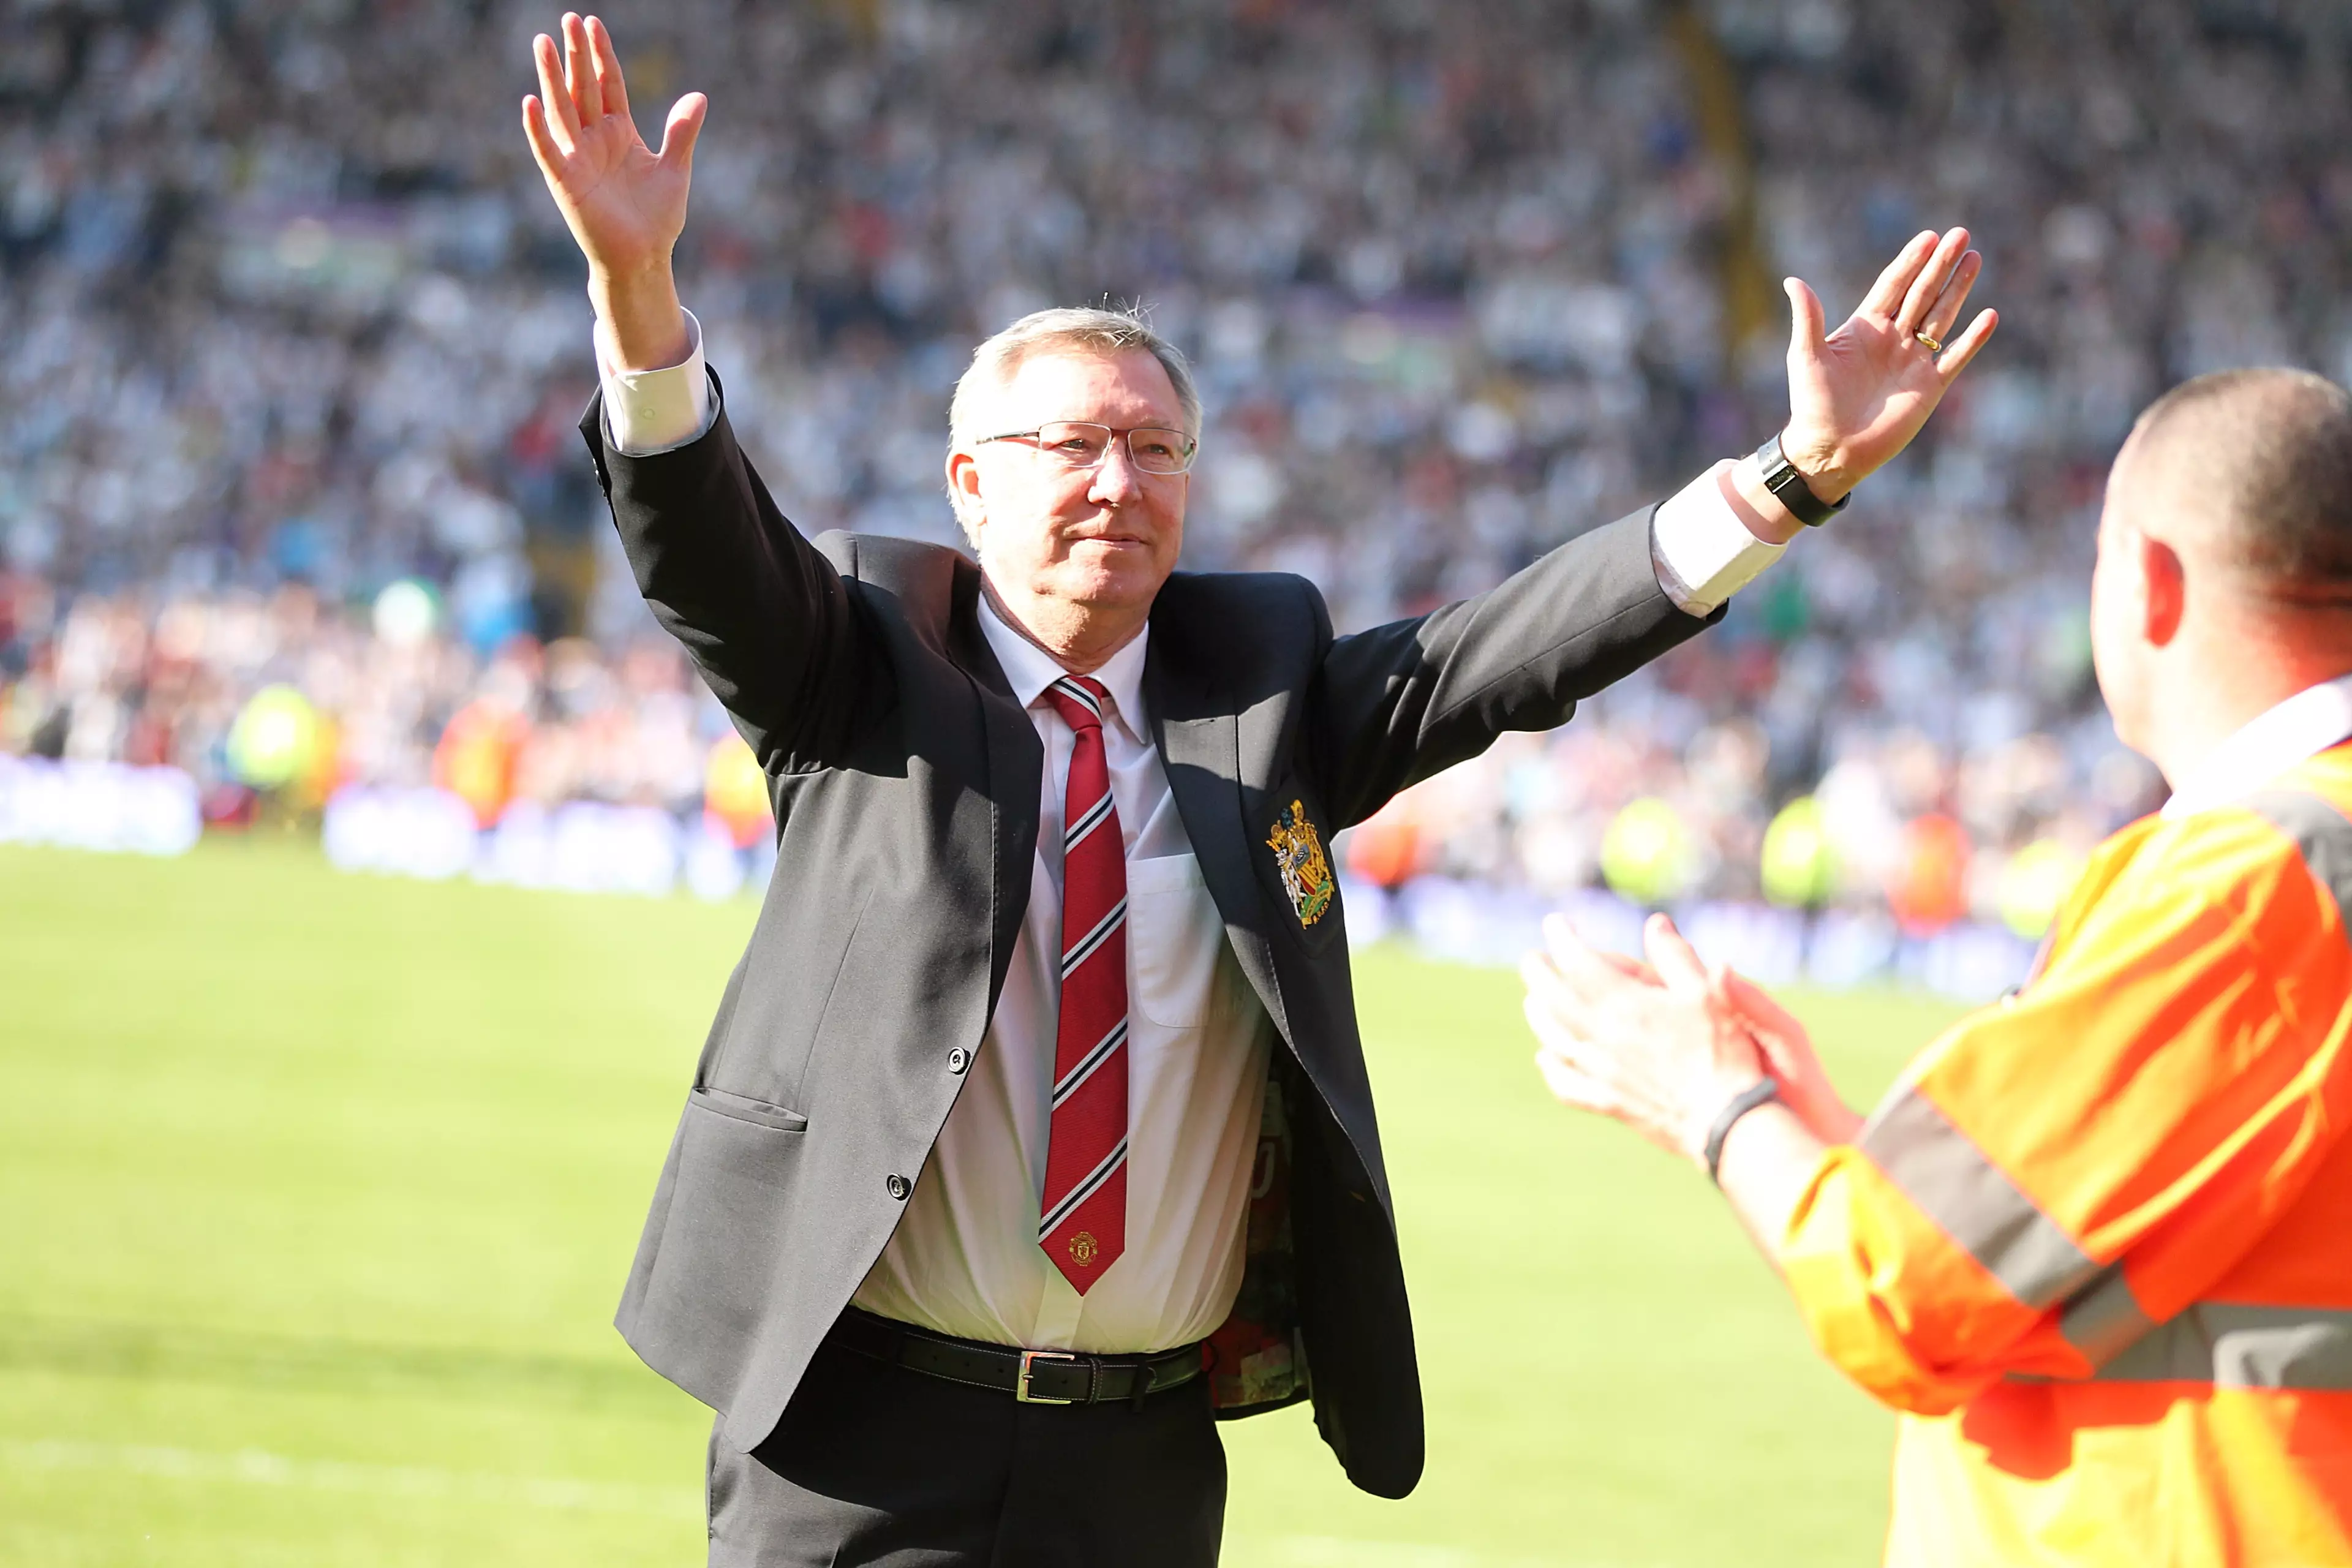 Fergie waves goodbye after his final game in charge. Image: PA Images